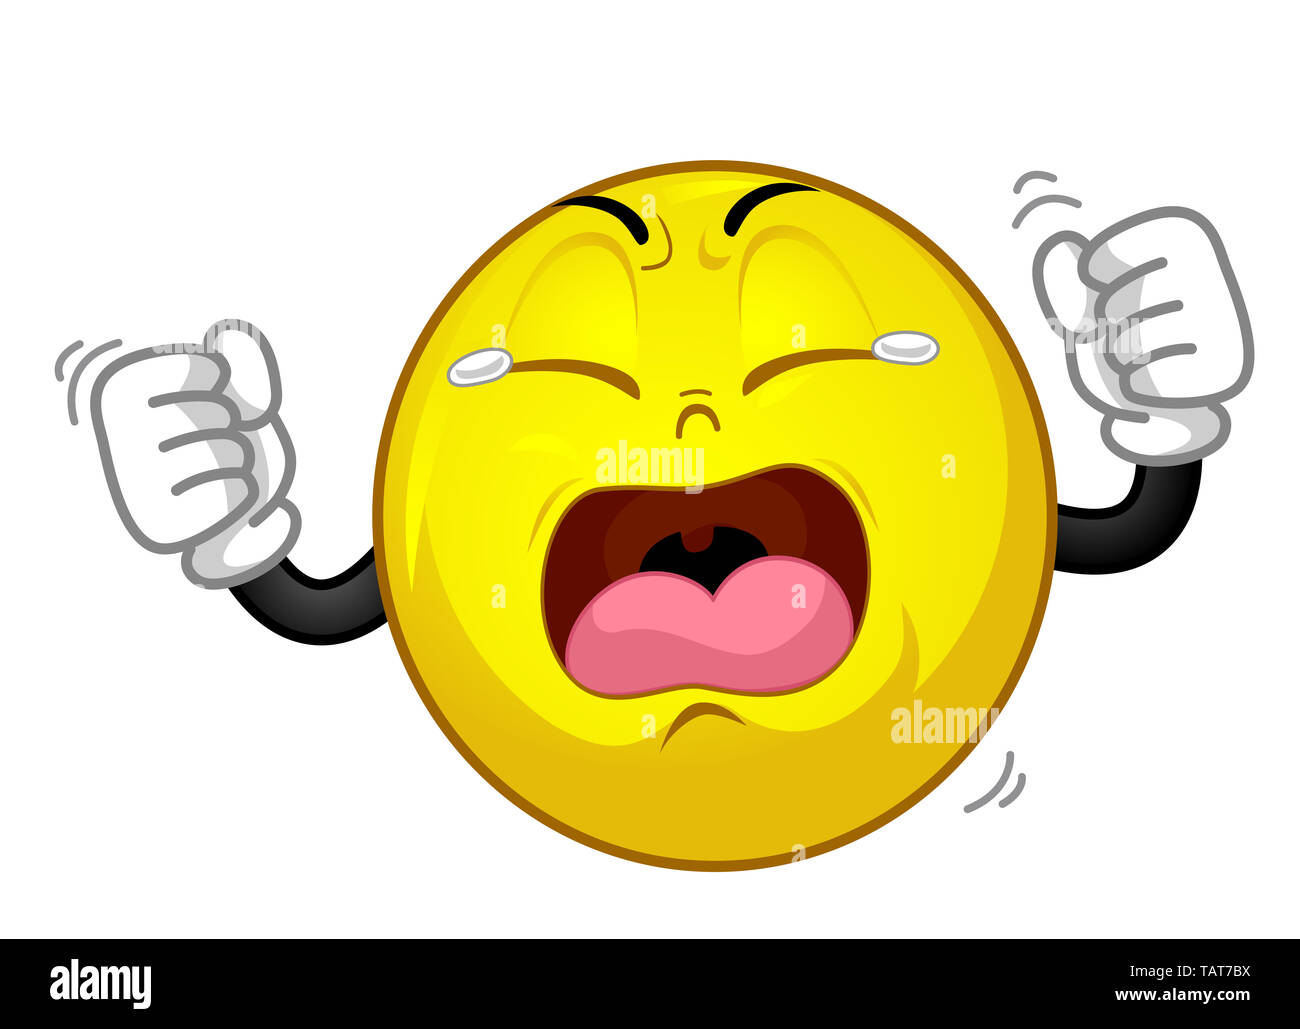 Illustration of a Smiley Mascot Crying Out Loud and Throwing Tantrum Stock Photo